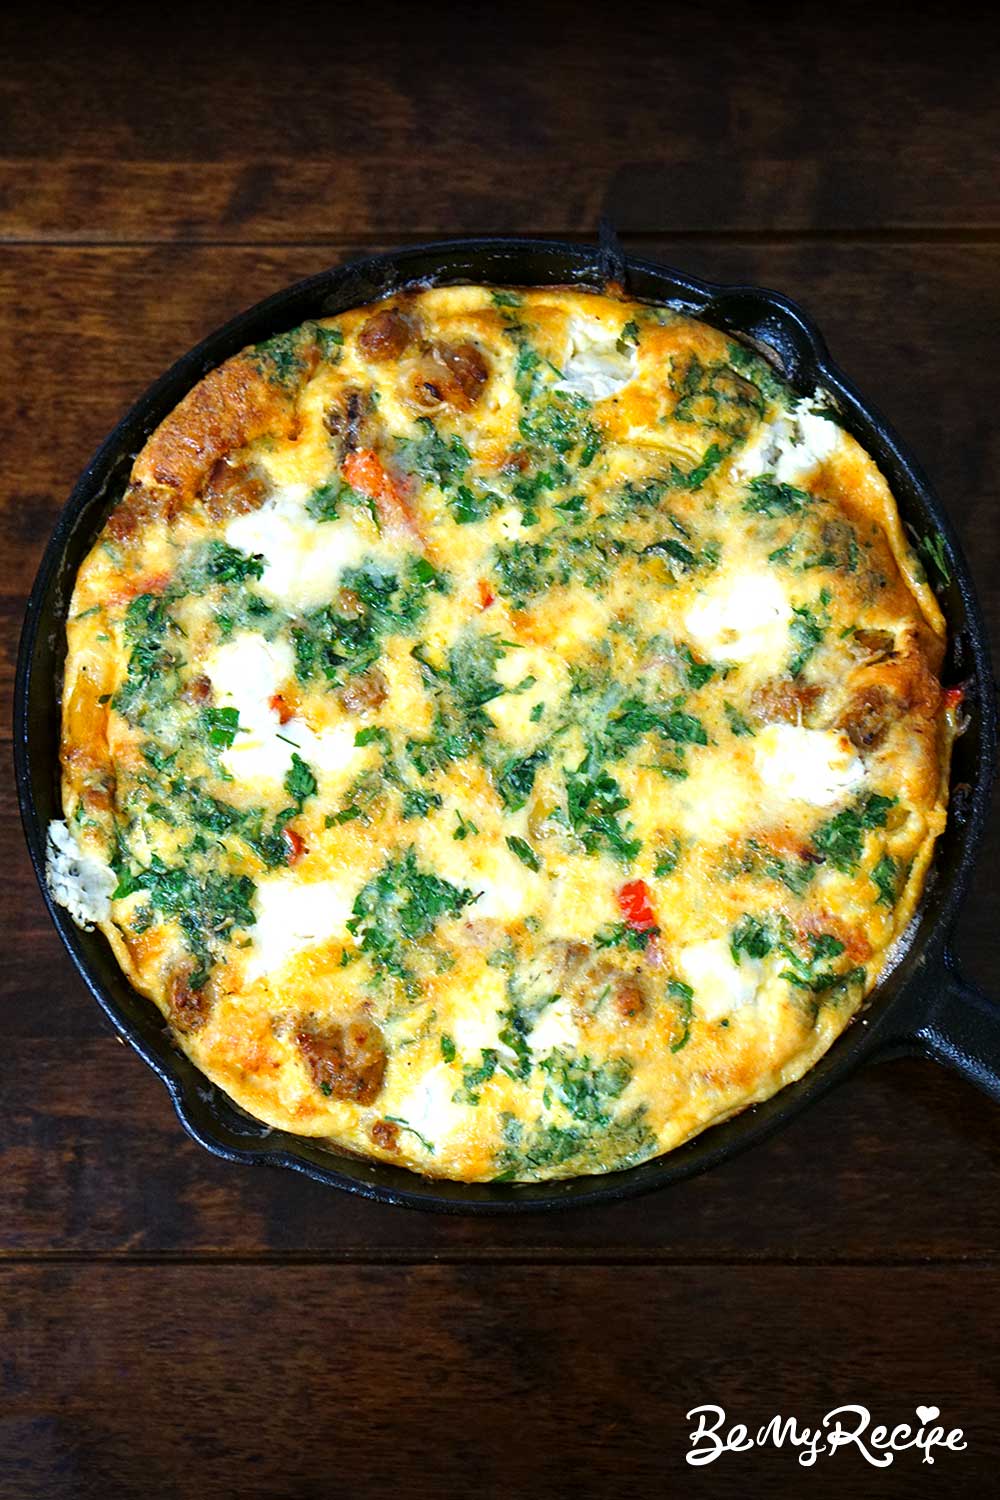 Sausage Frittata Recipe with Bell Peppers, Goat Cheese, and Parmesan